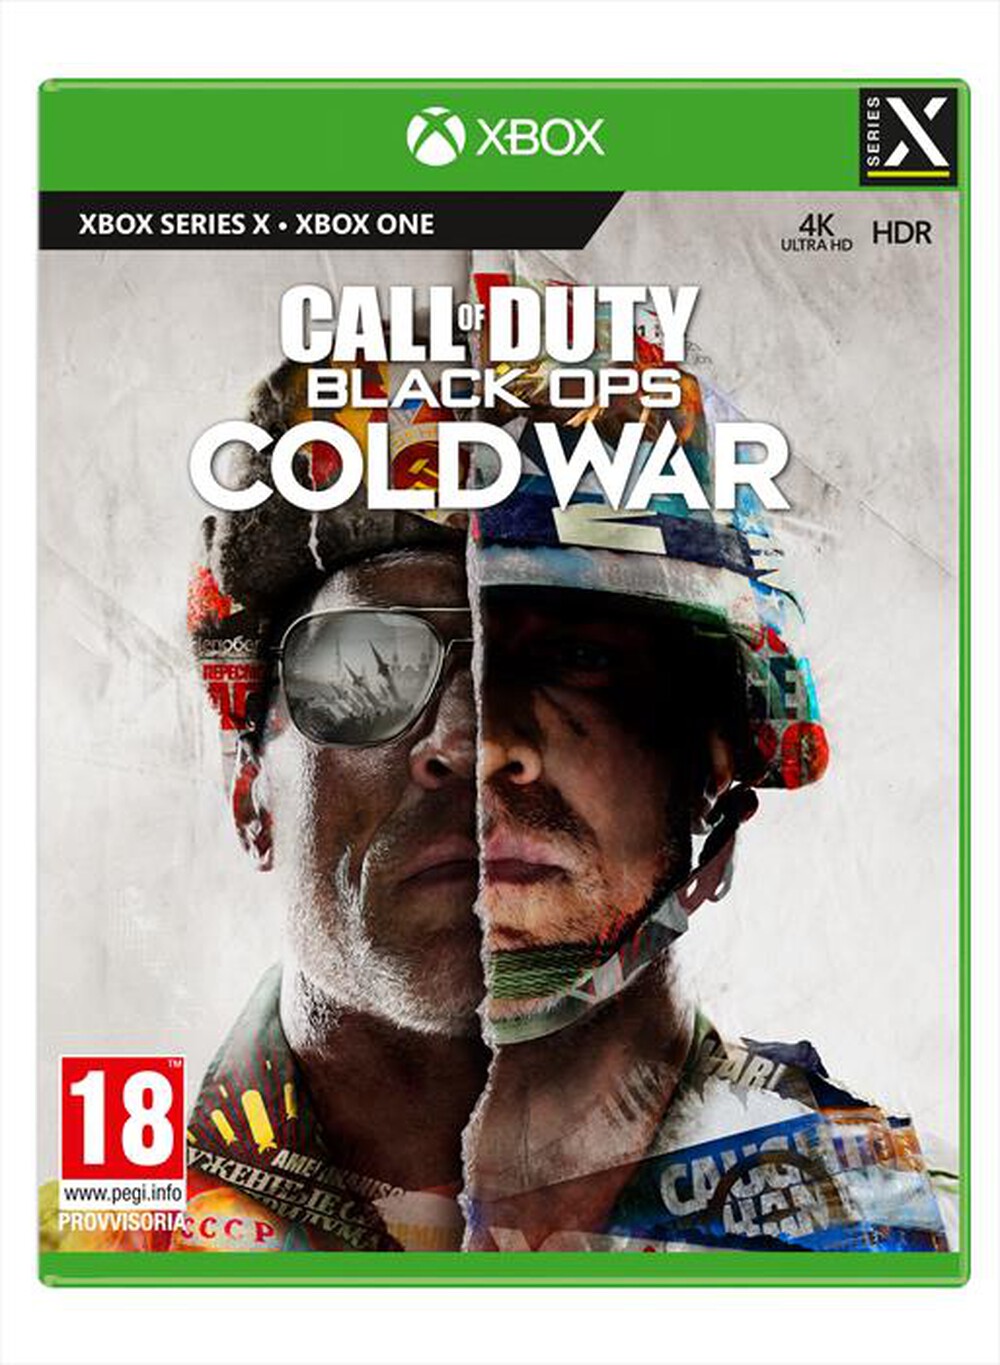 "ACTIVISION-BLIZZARD - CALL OF DUTY: BLACK OPS COLD WAR XBOX X"